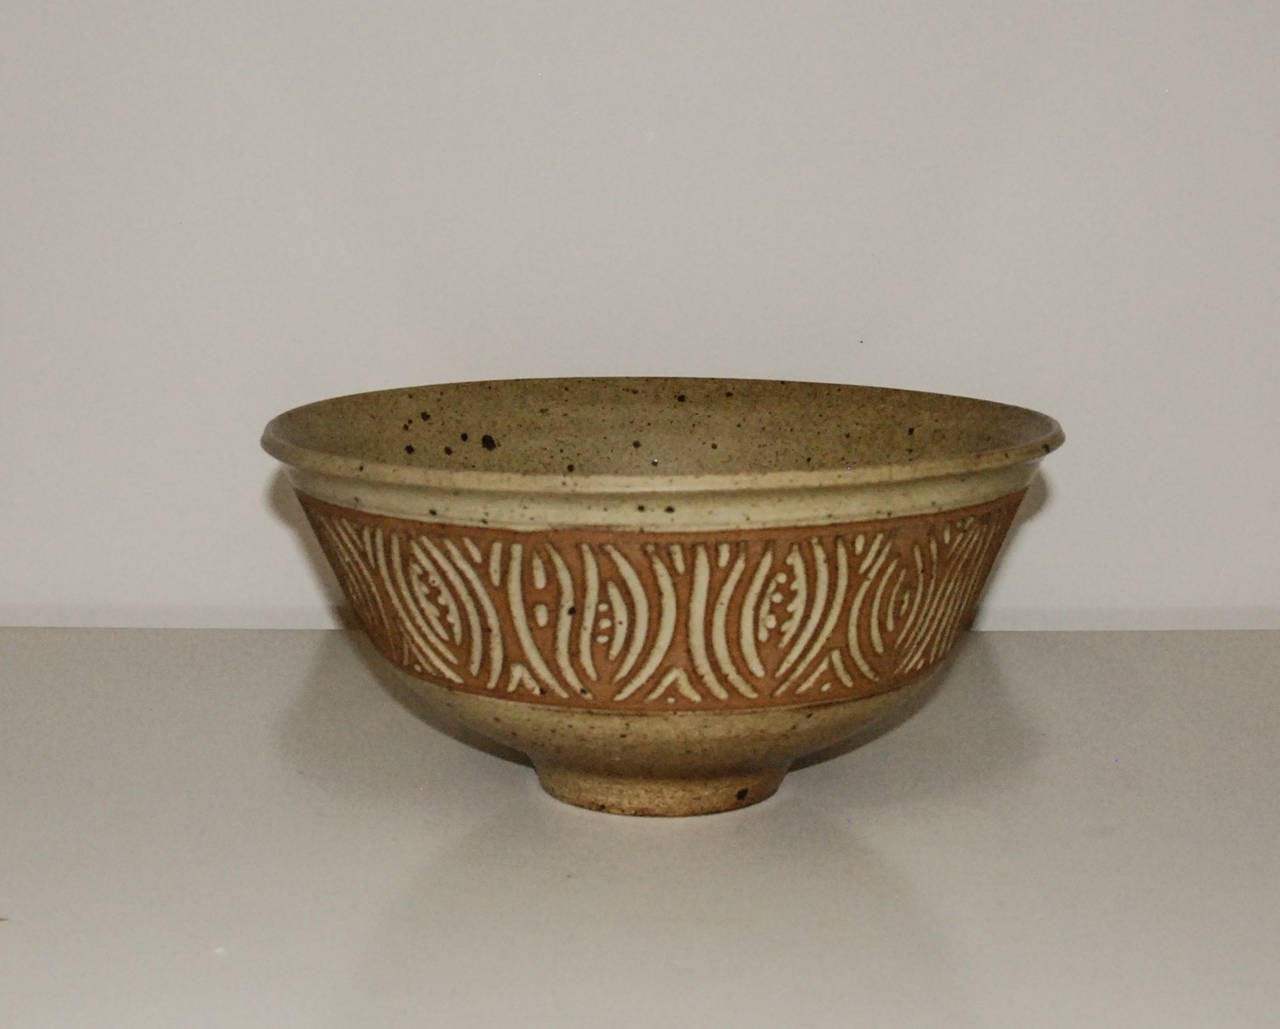 A fine and large sgraffito stoneware bowl by master potter Peter Lane with a matte glaze.  Lane has exhibited his large scale architectural room dividers and lamps at the Pavilion of Art and Design in New York City and is represented in the United